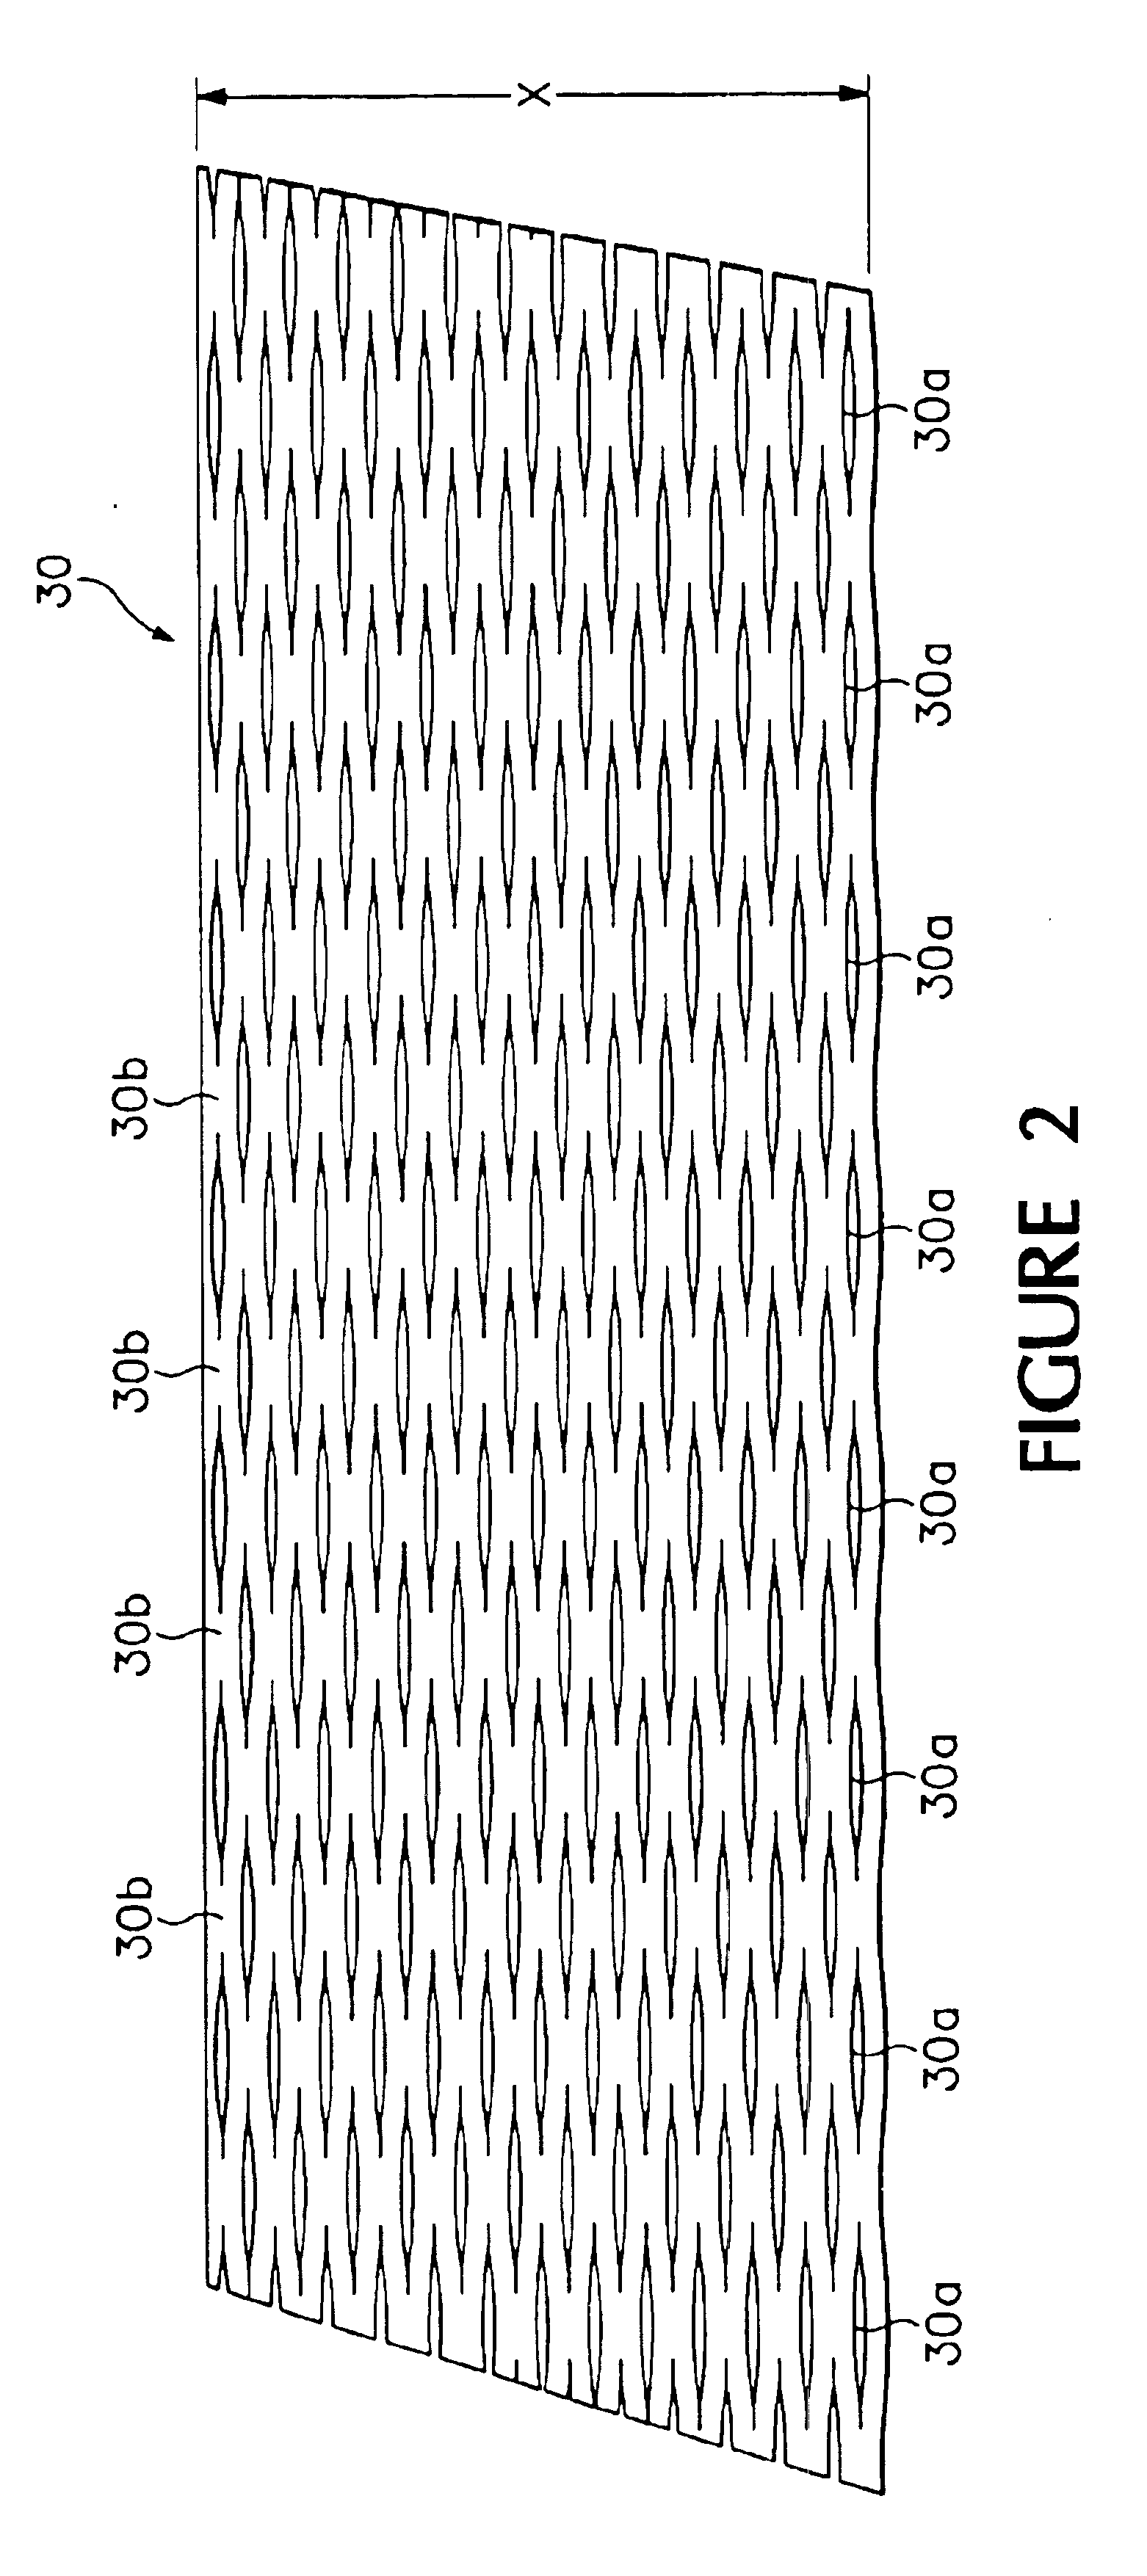 Method for producing a processed continuous veneer ribbon and consolidated processed veneer strand product therefrom